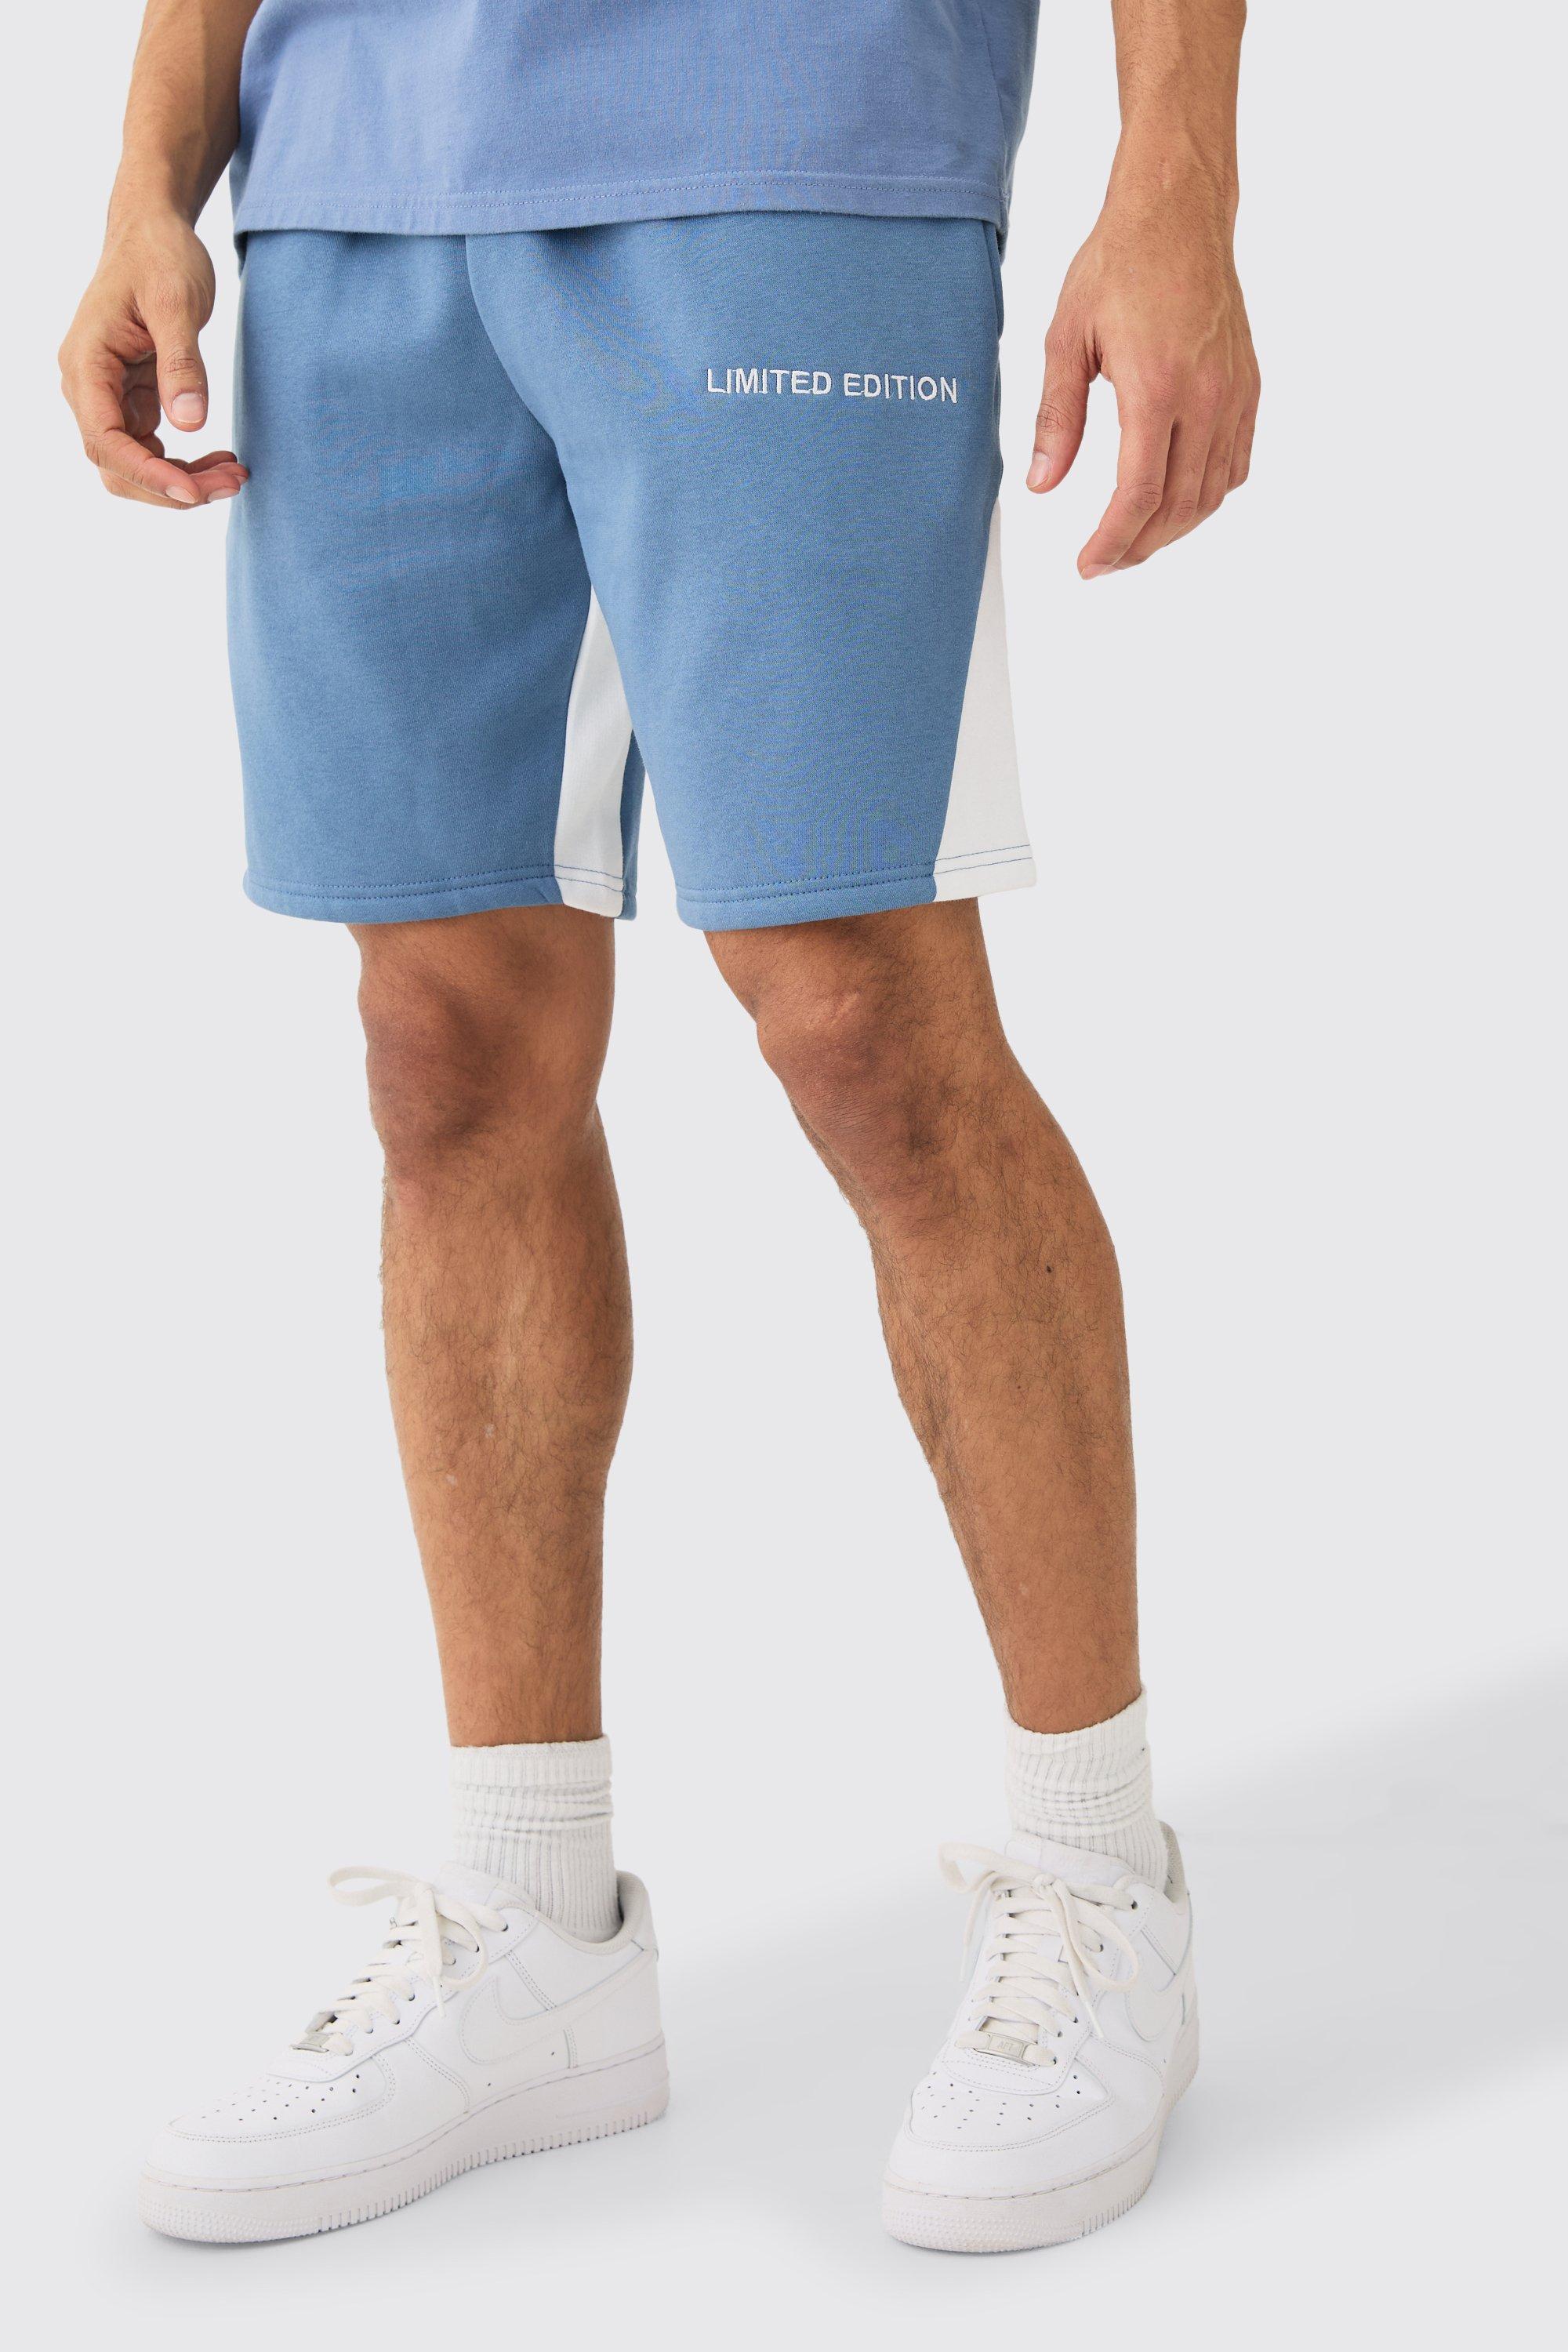 Image of Relaxed Limited Edition Gusset Short, Azzurro